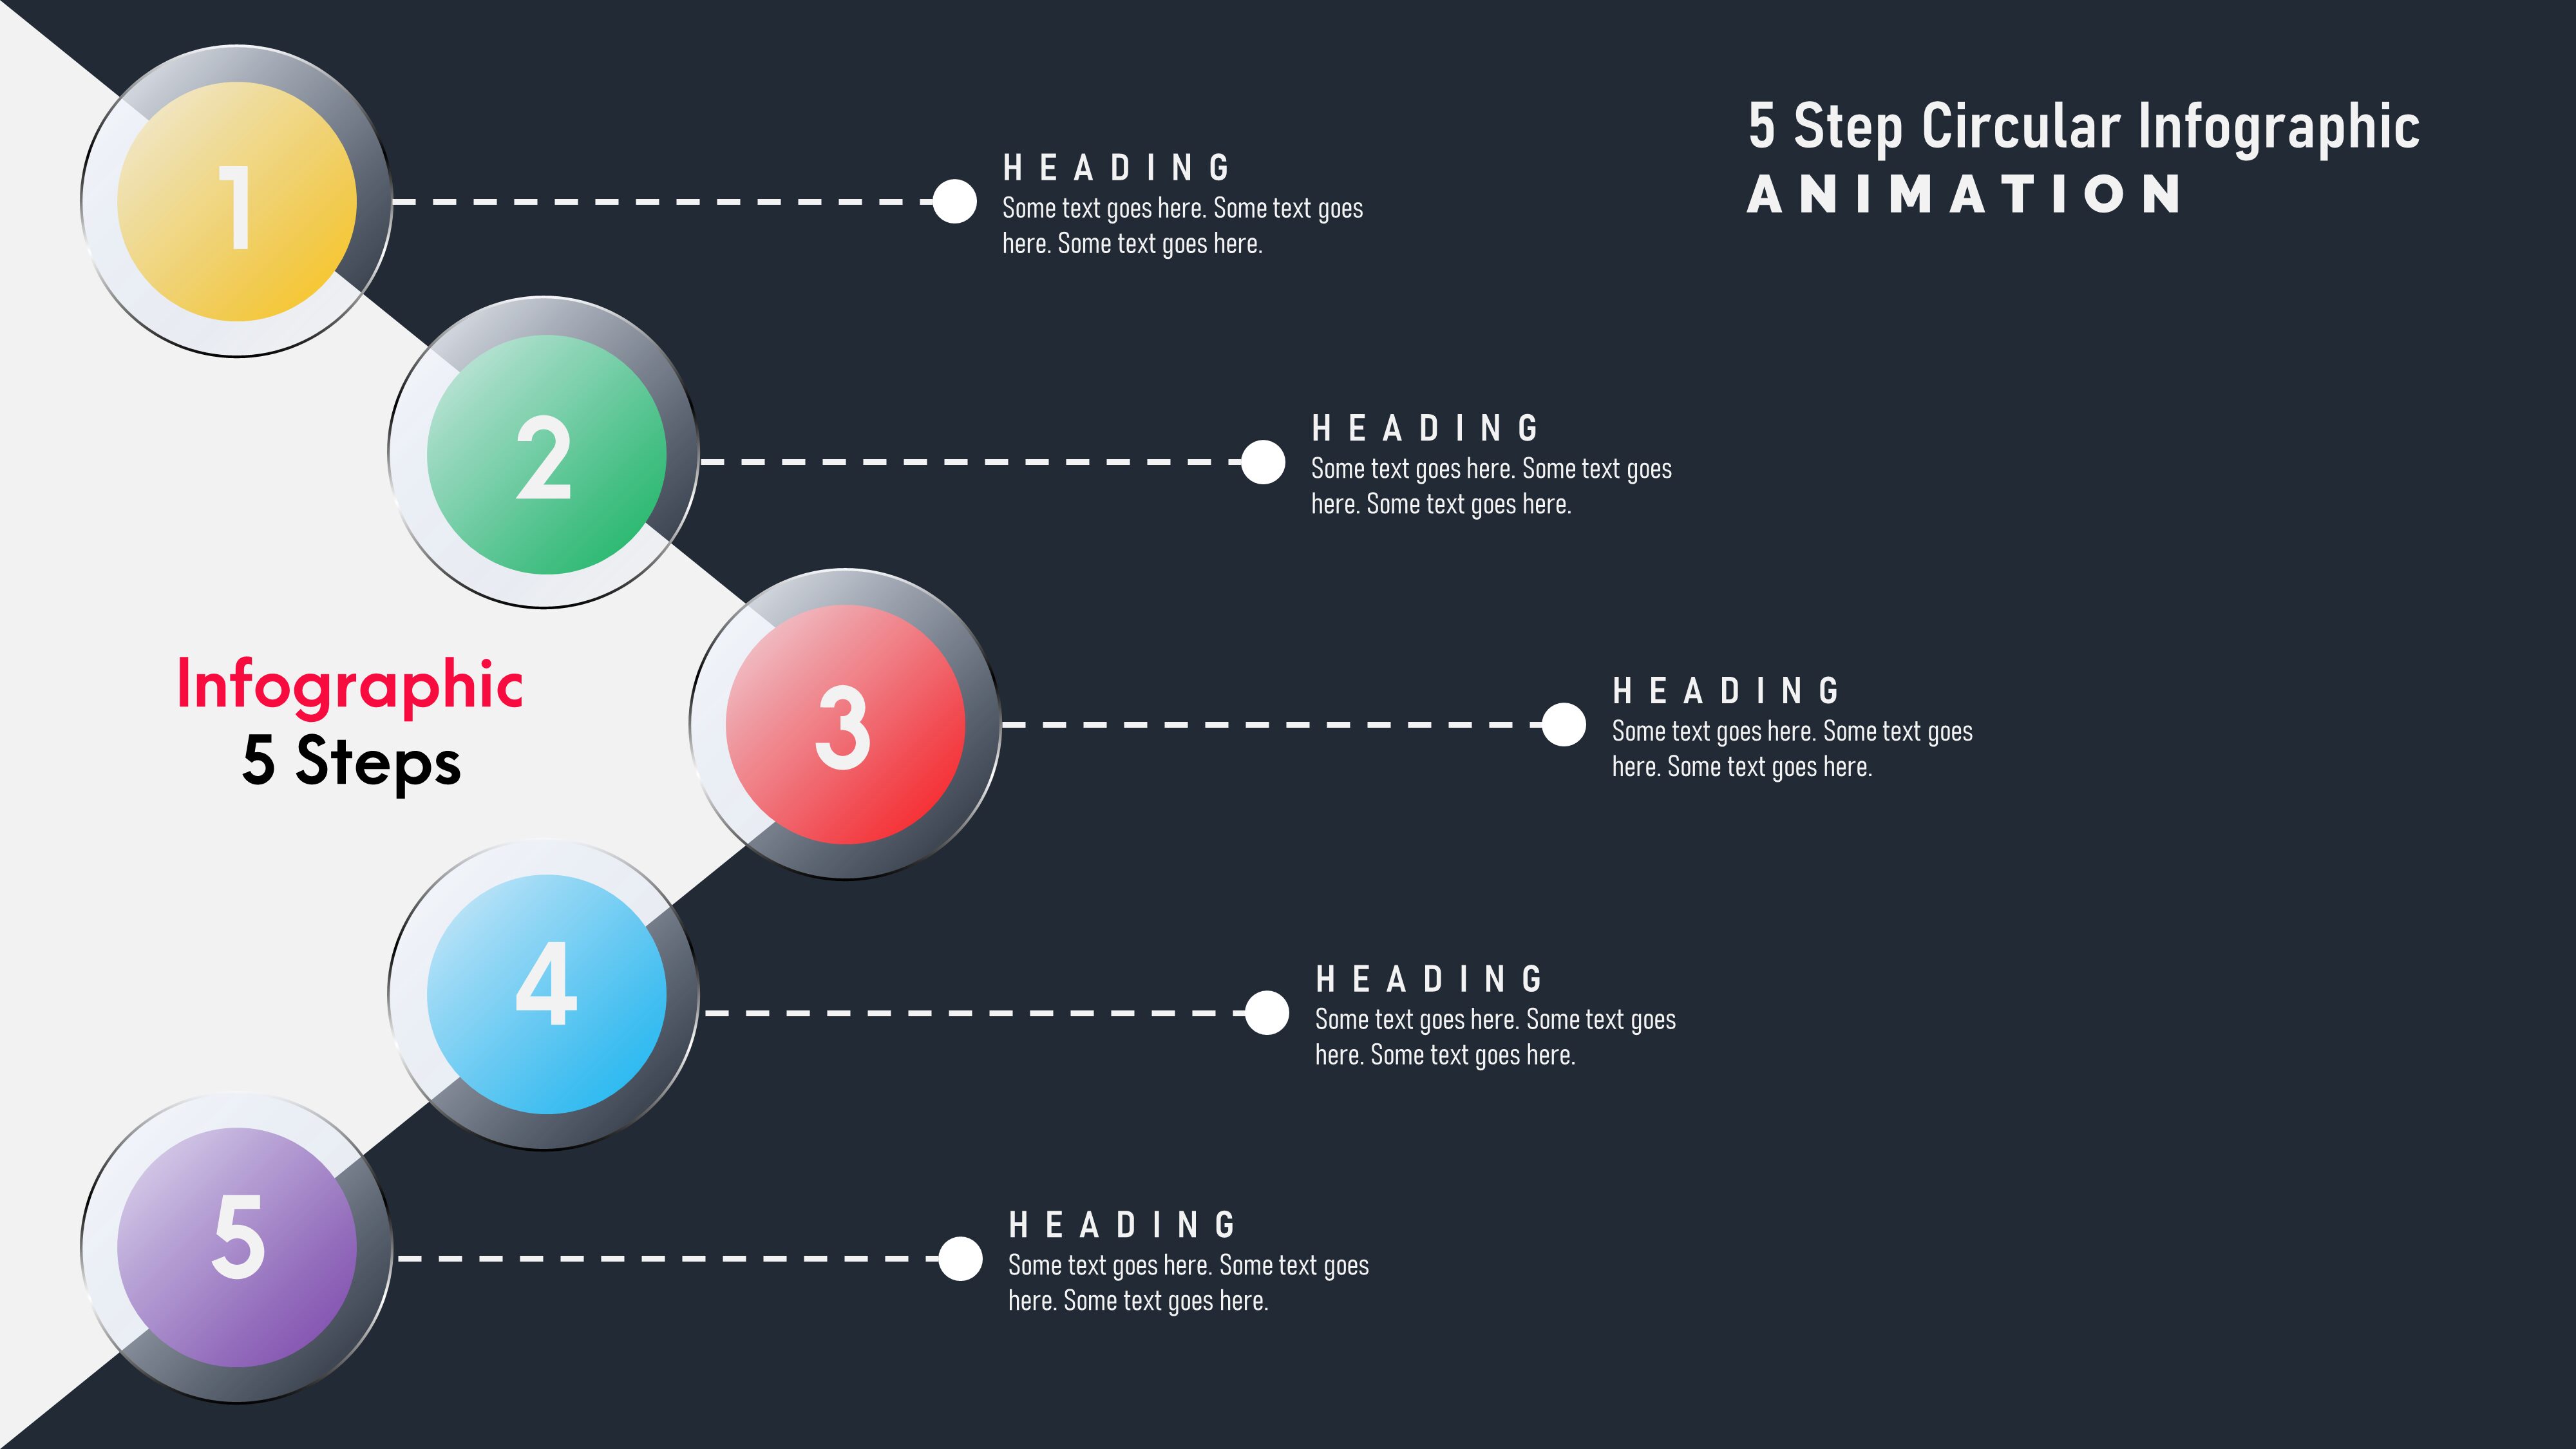 56powerpoint 5 Step Circular Infographic Animation Powerup With Powerpoint 1746